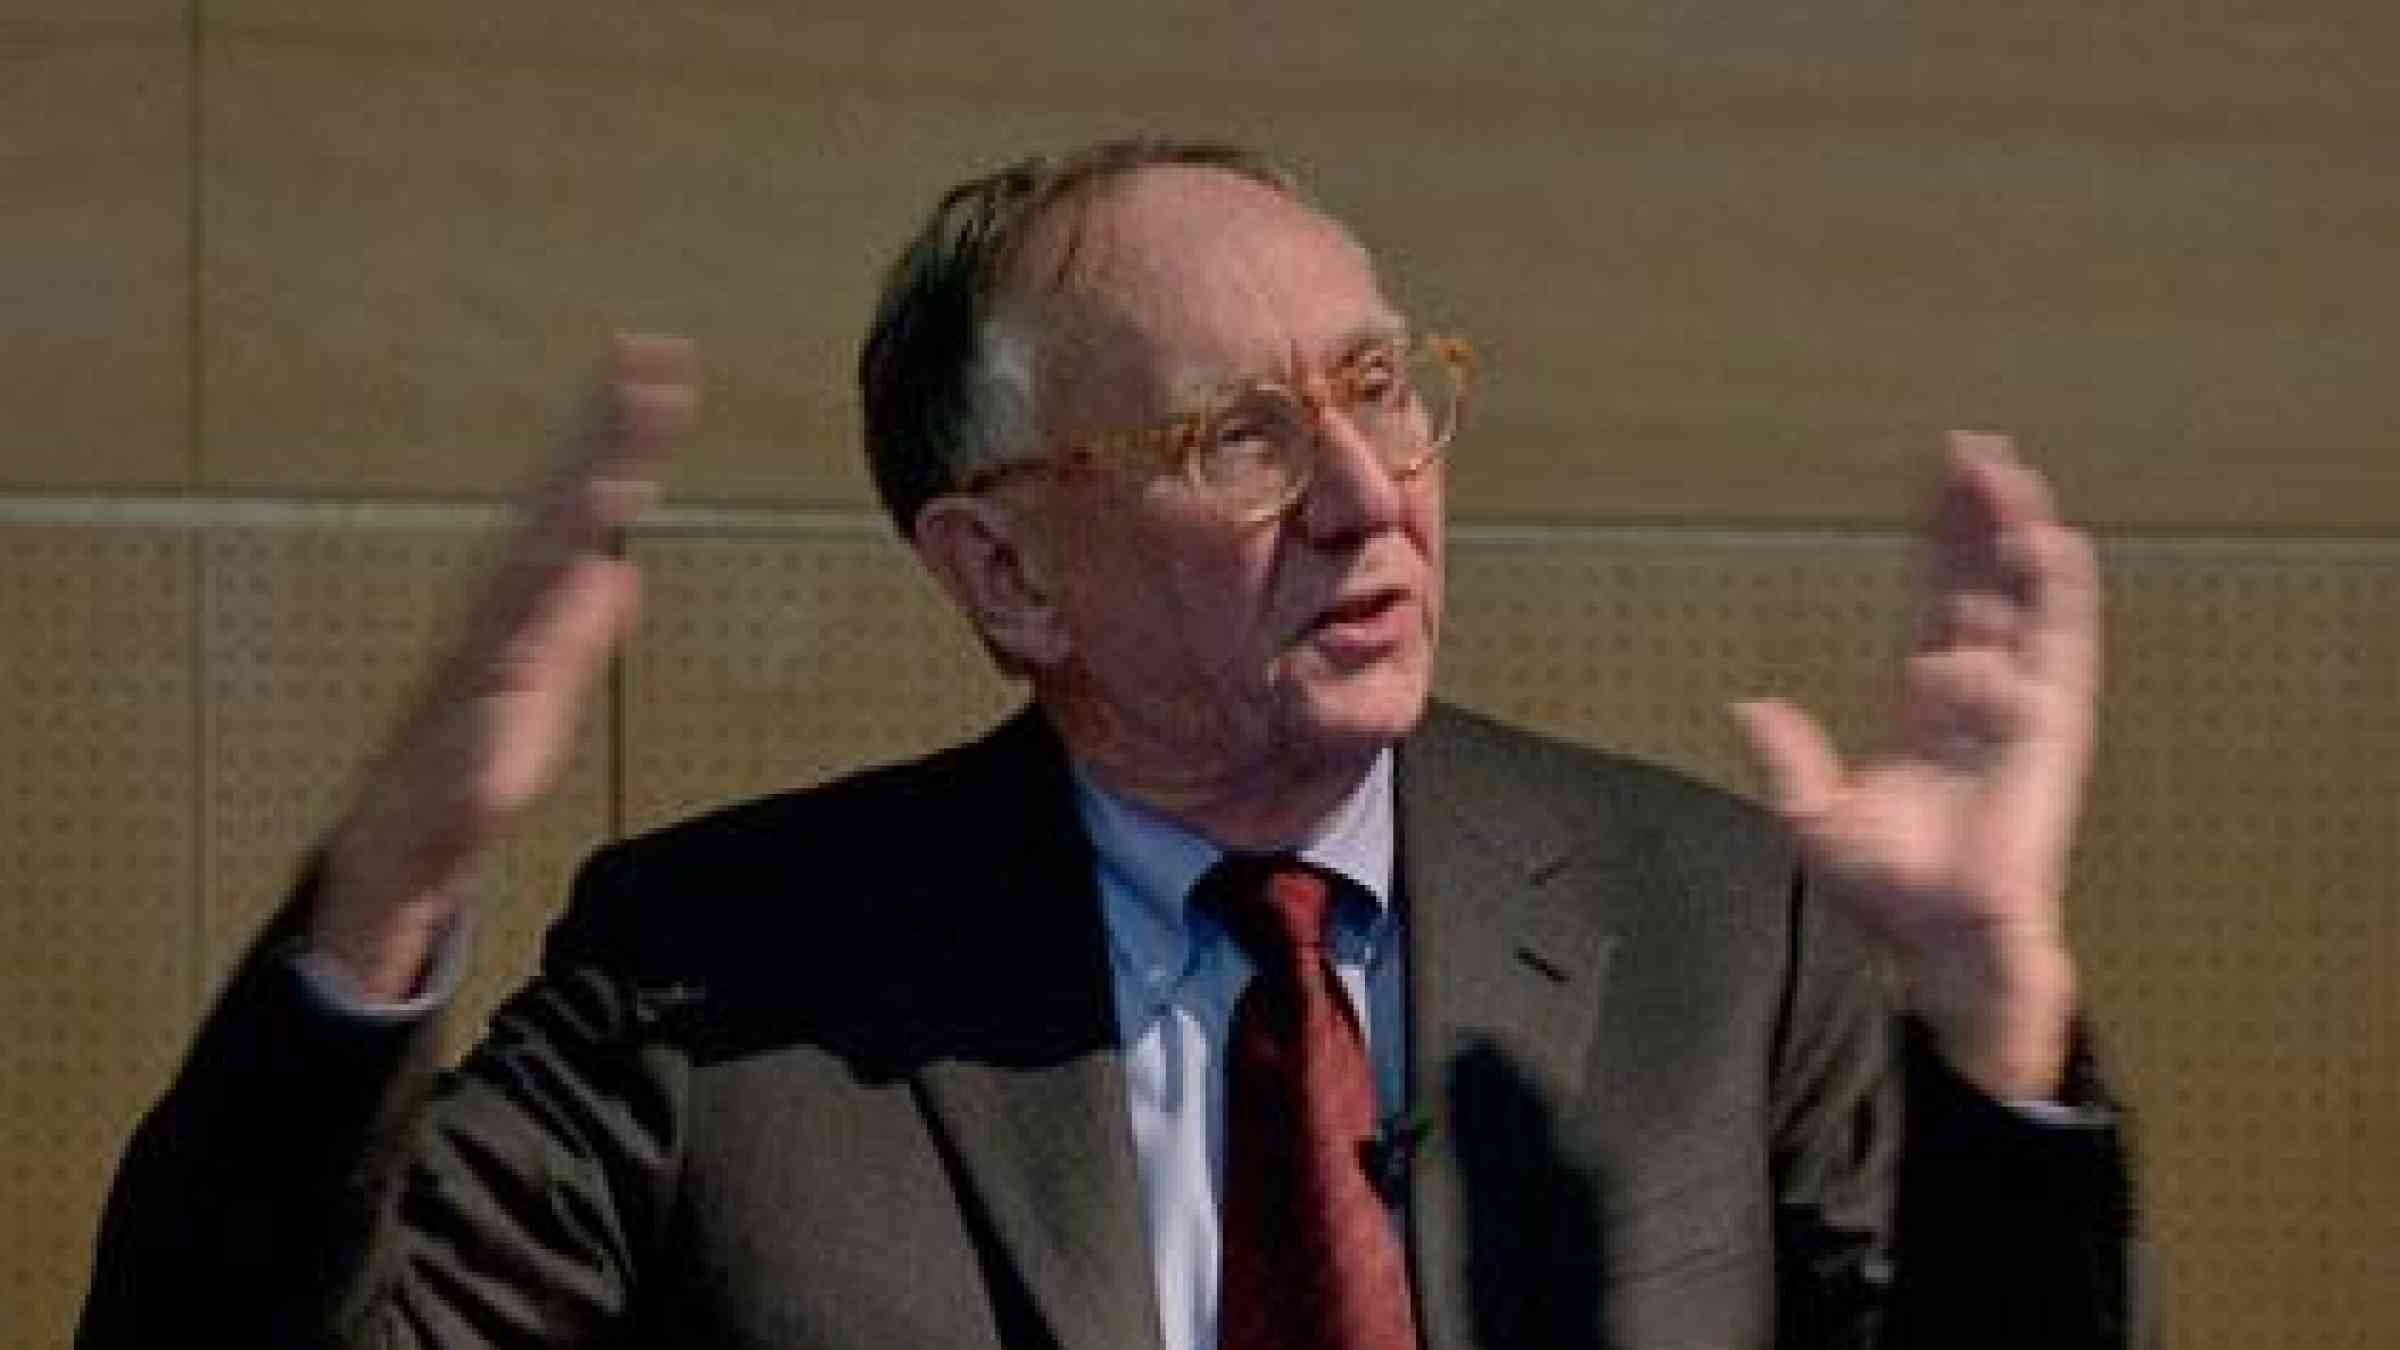 Jack Dangermond, founder and President of Esri, speaks about the future of GIS in the work of the international community at the WMO-hosted GIS conference in April. (U.S. Mission photo by Eric Bridiers)